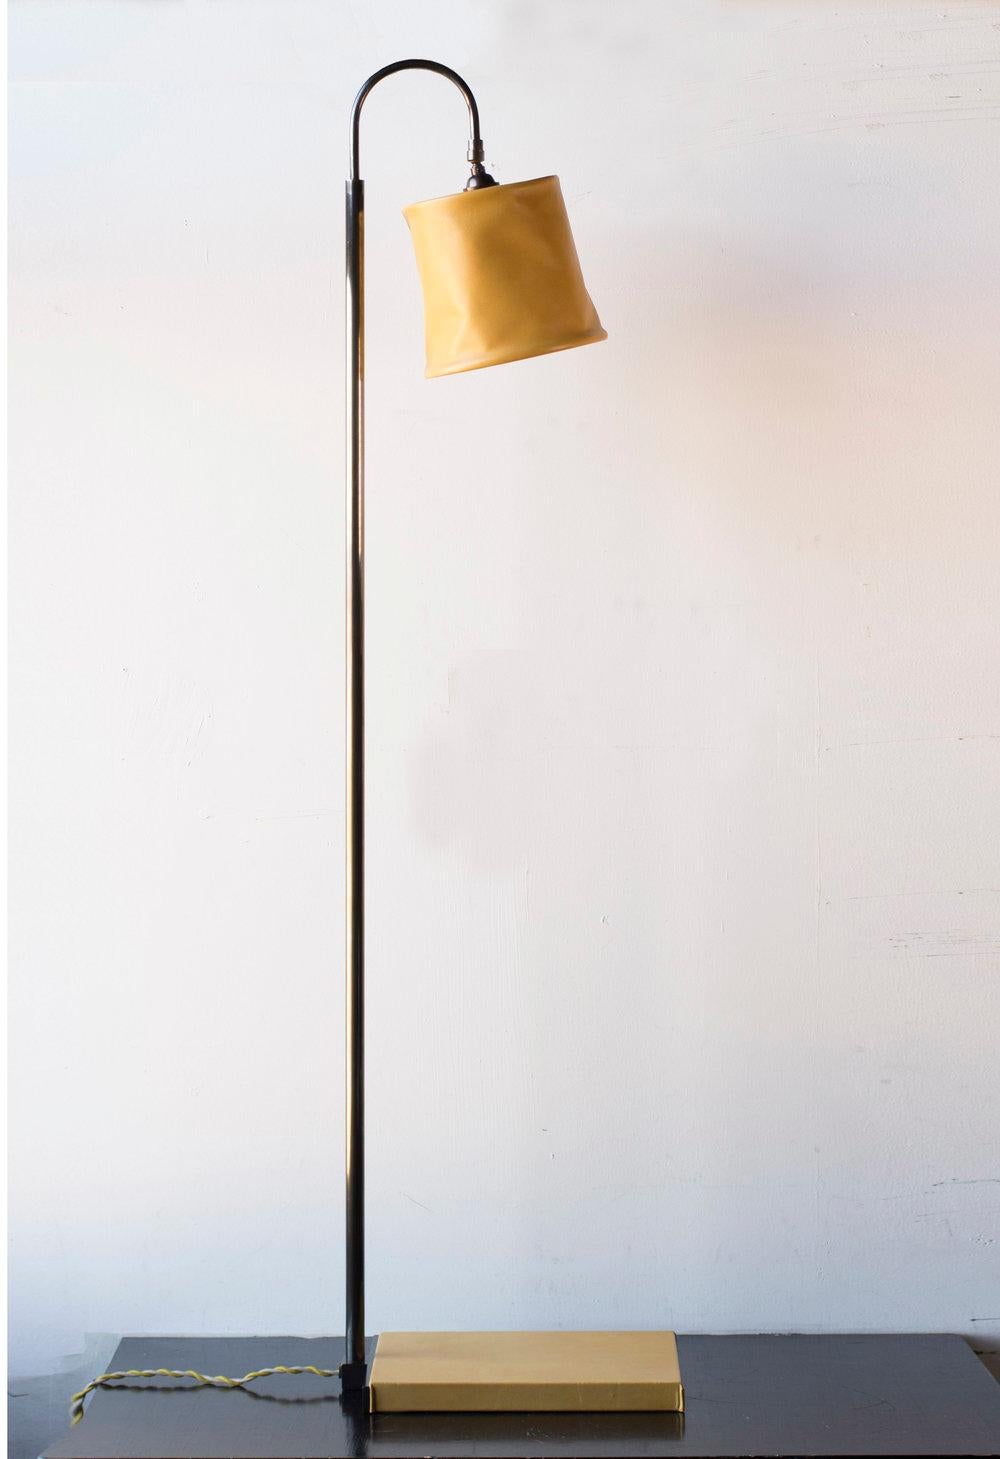 Series01 Floor Lamp, Hand-Dyed Graphite Gray Leather, Matte Blackened Brass For Sale 1